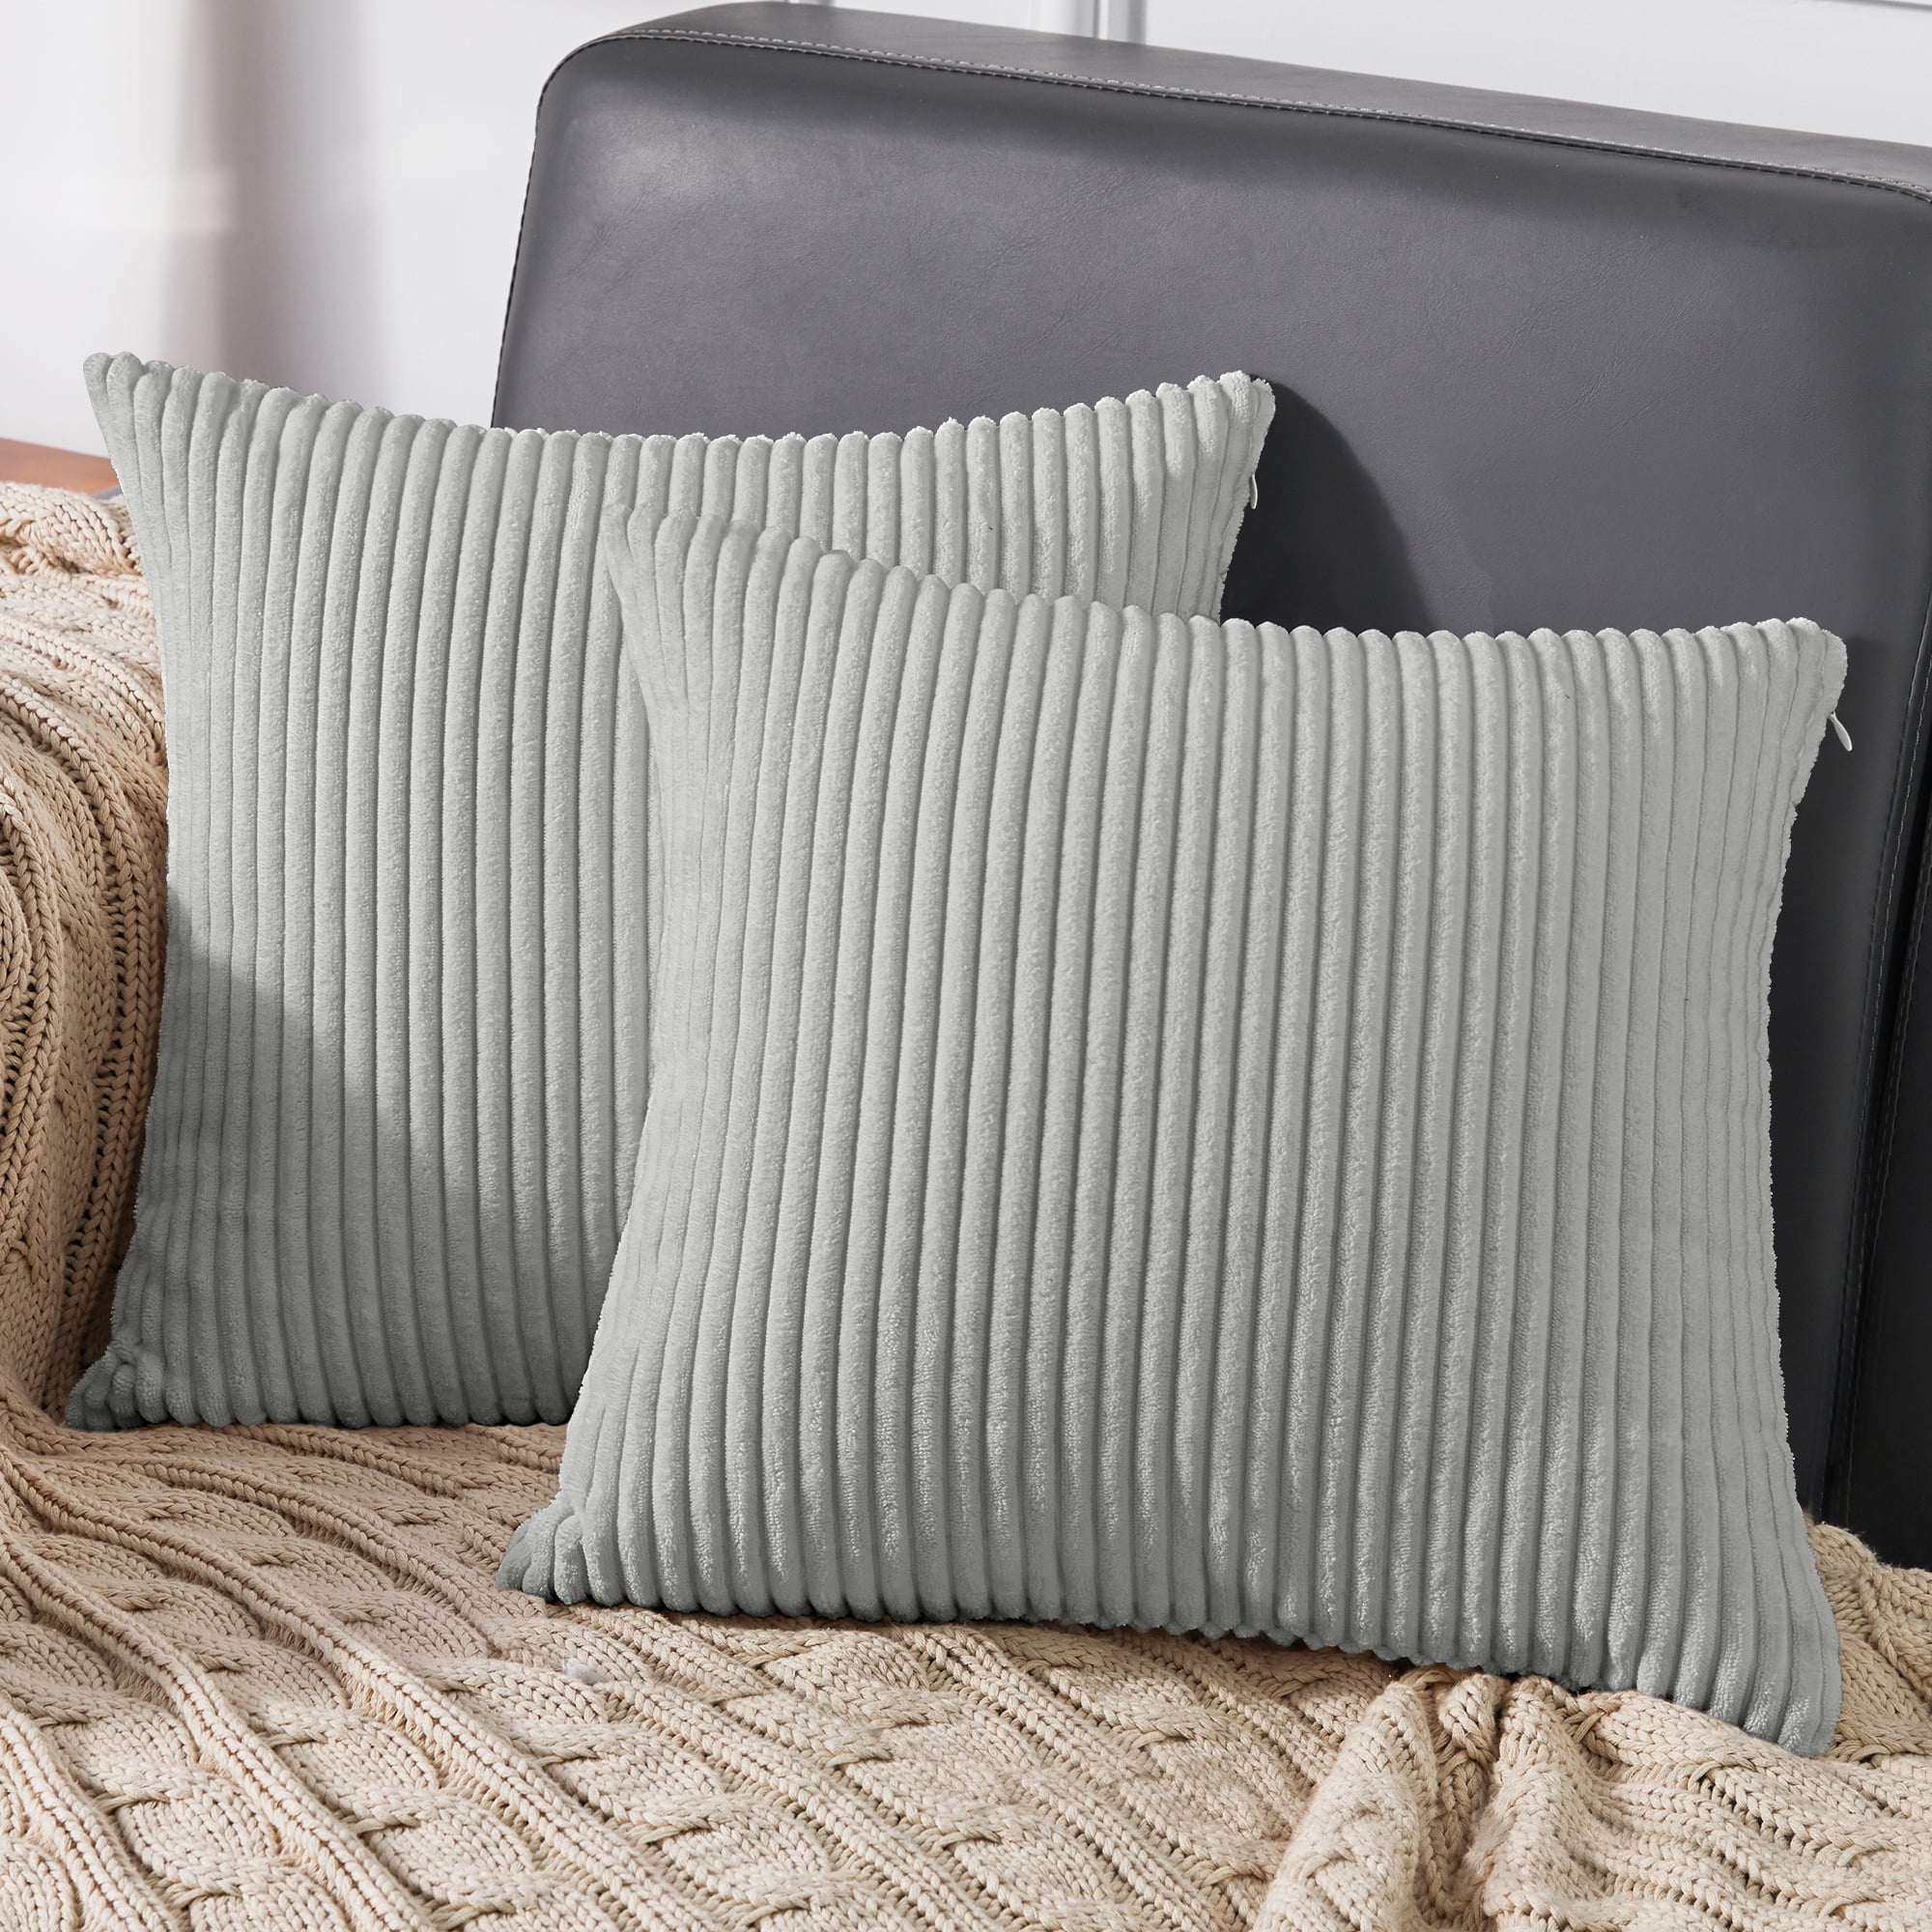 Square Corduroy Throw Pillow Cover, Striped Cushion Cover for Bedroom